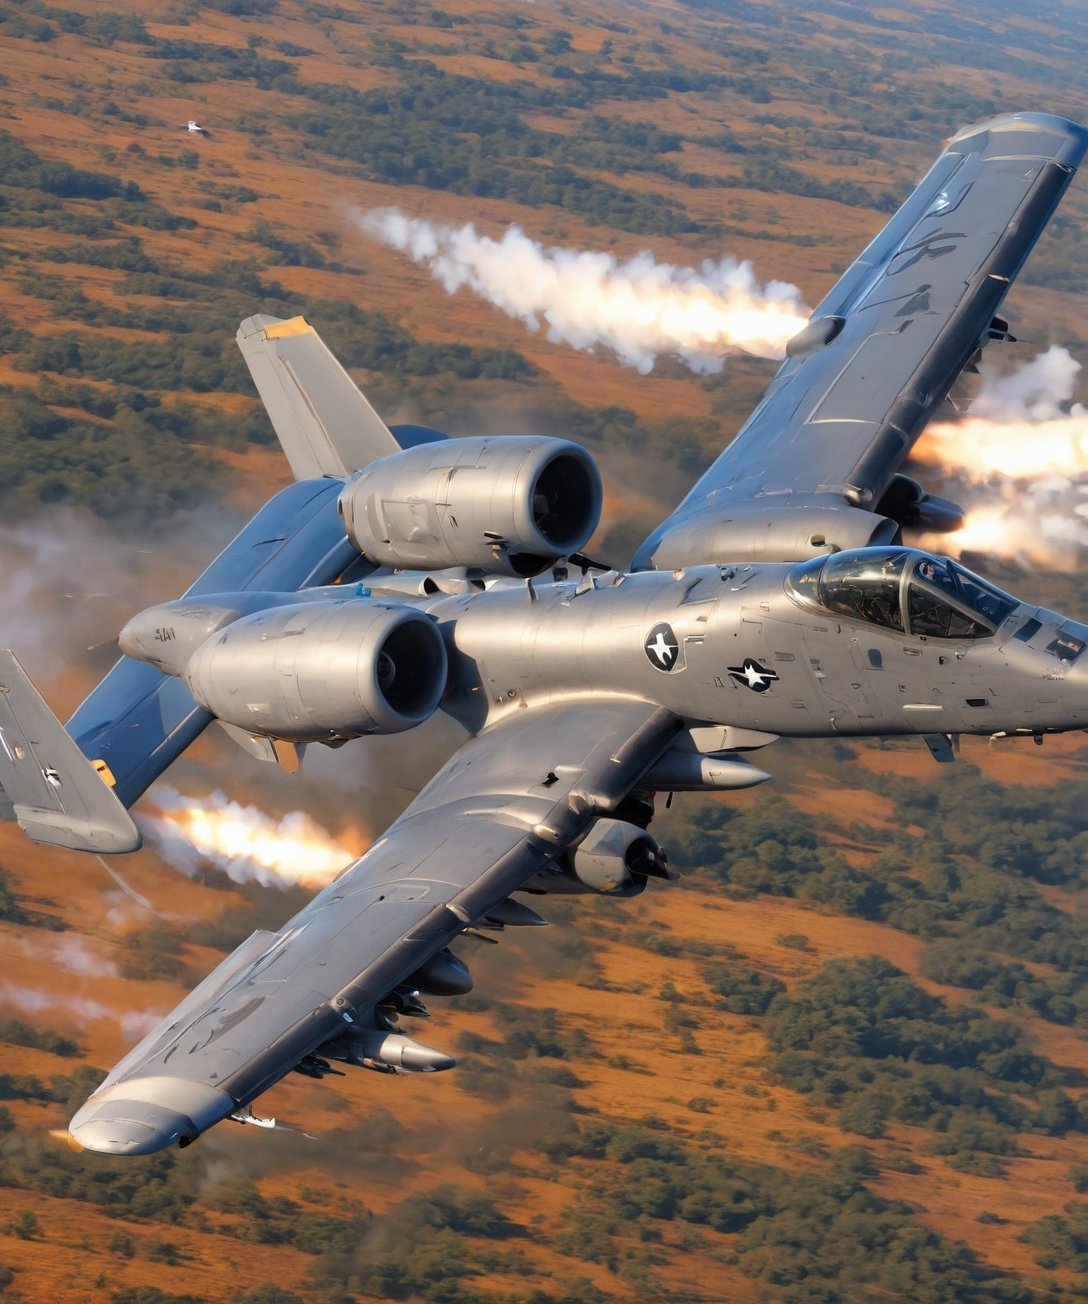 A-10,military, traditional media, flying, realistic, aircraft, military vehicle, airplane, vehicle focus, jet, fighter jet